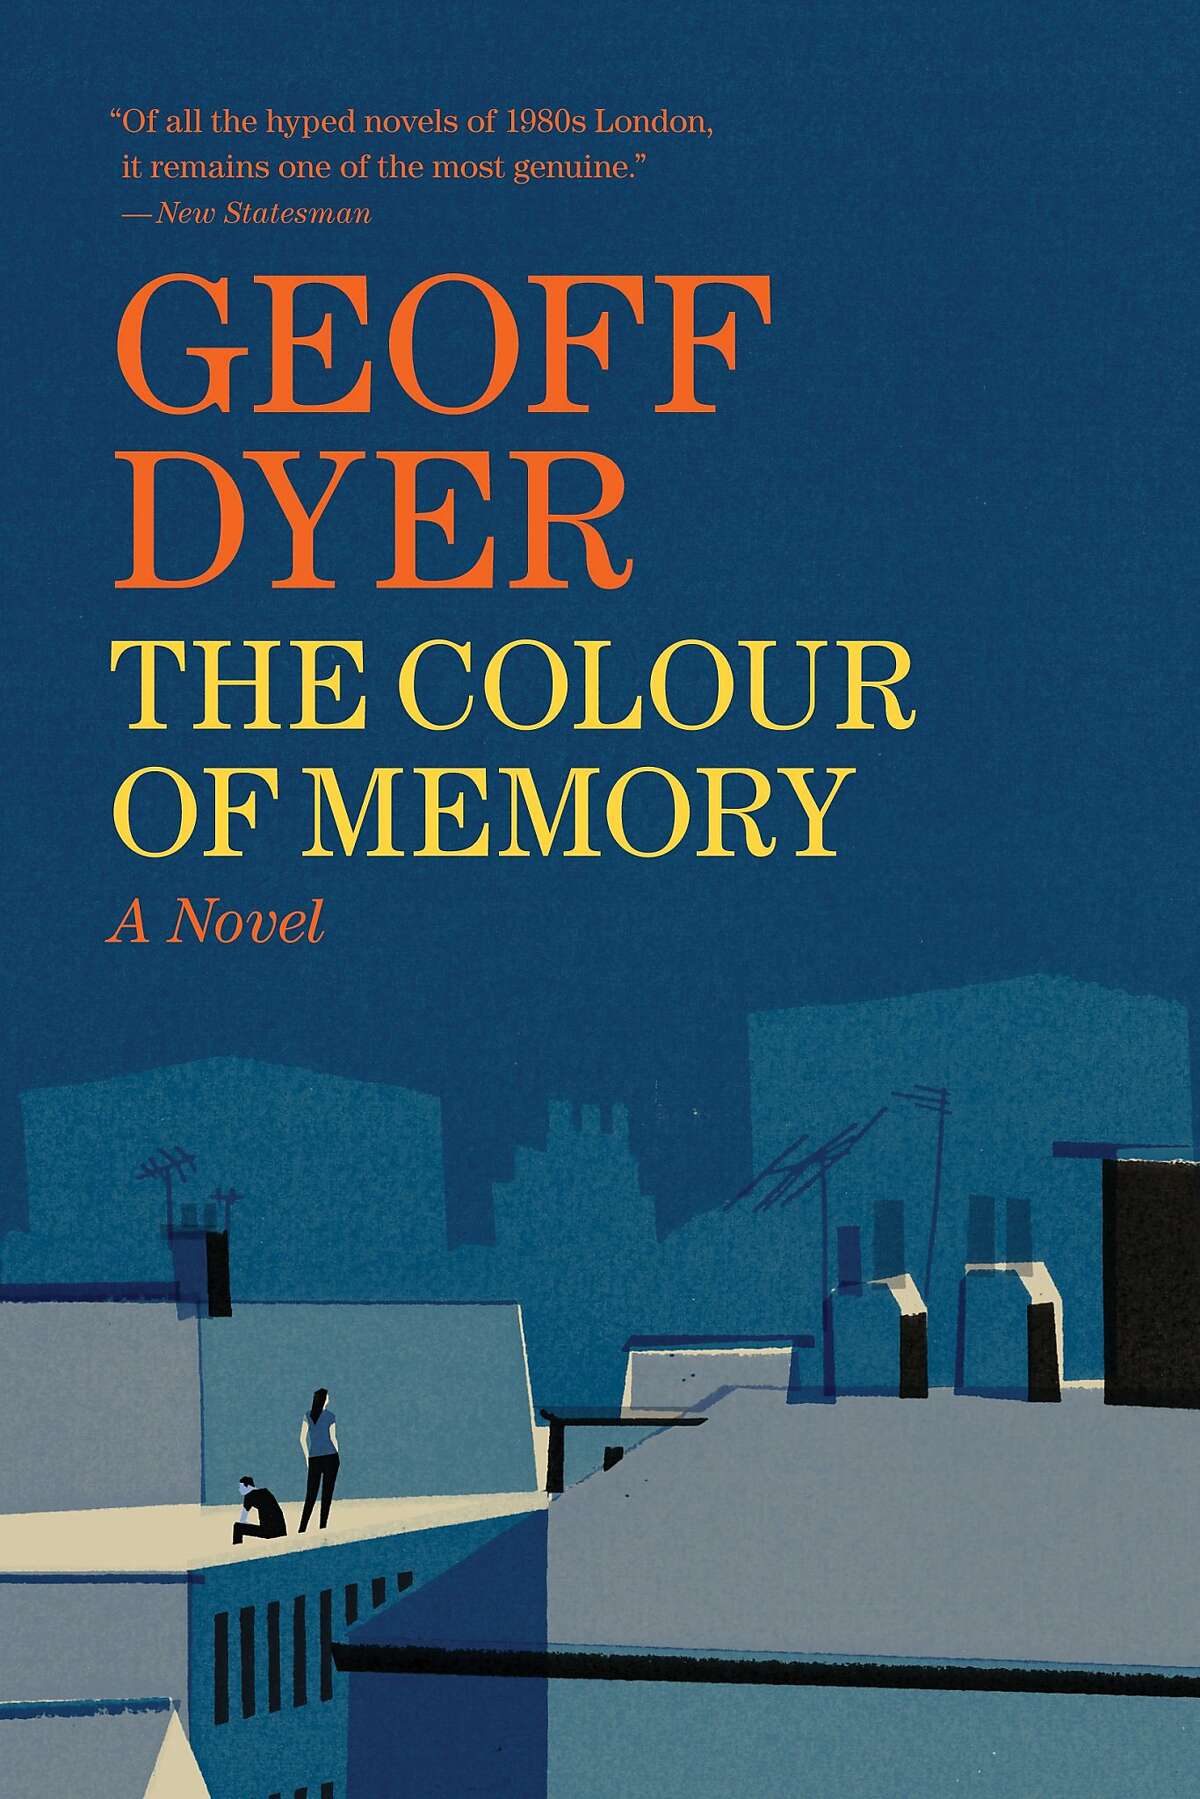 "The Colour of Memory," by Geoff Dyer